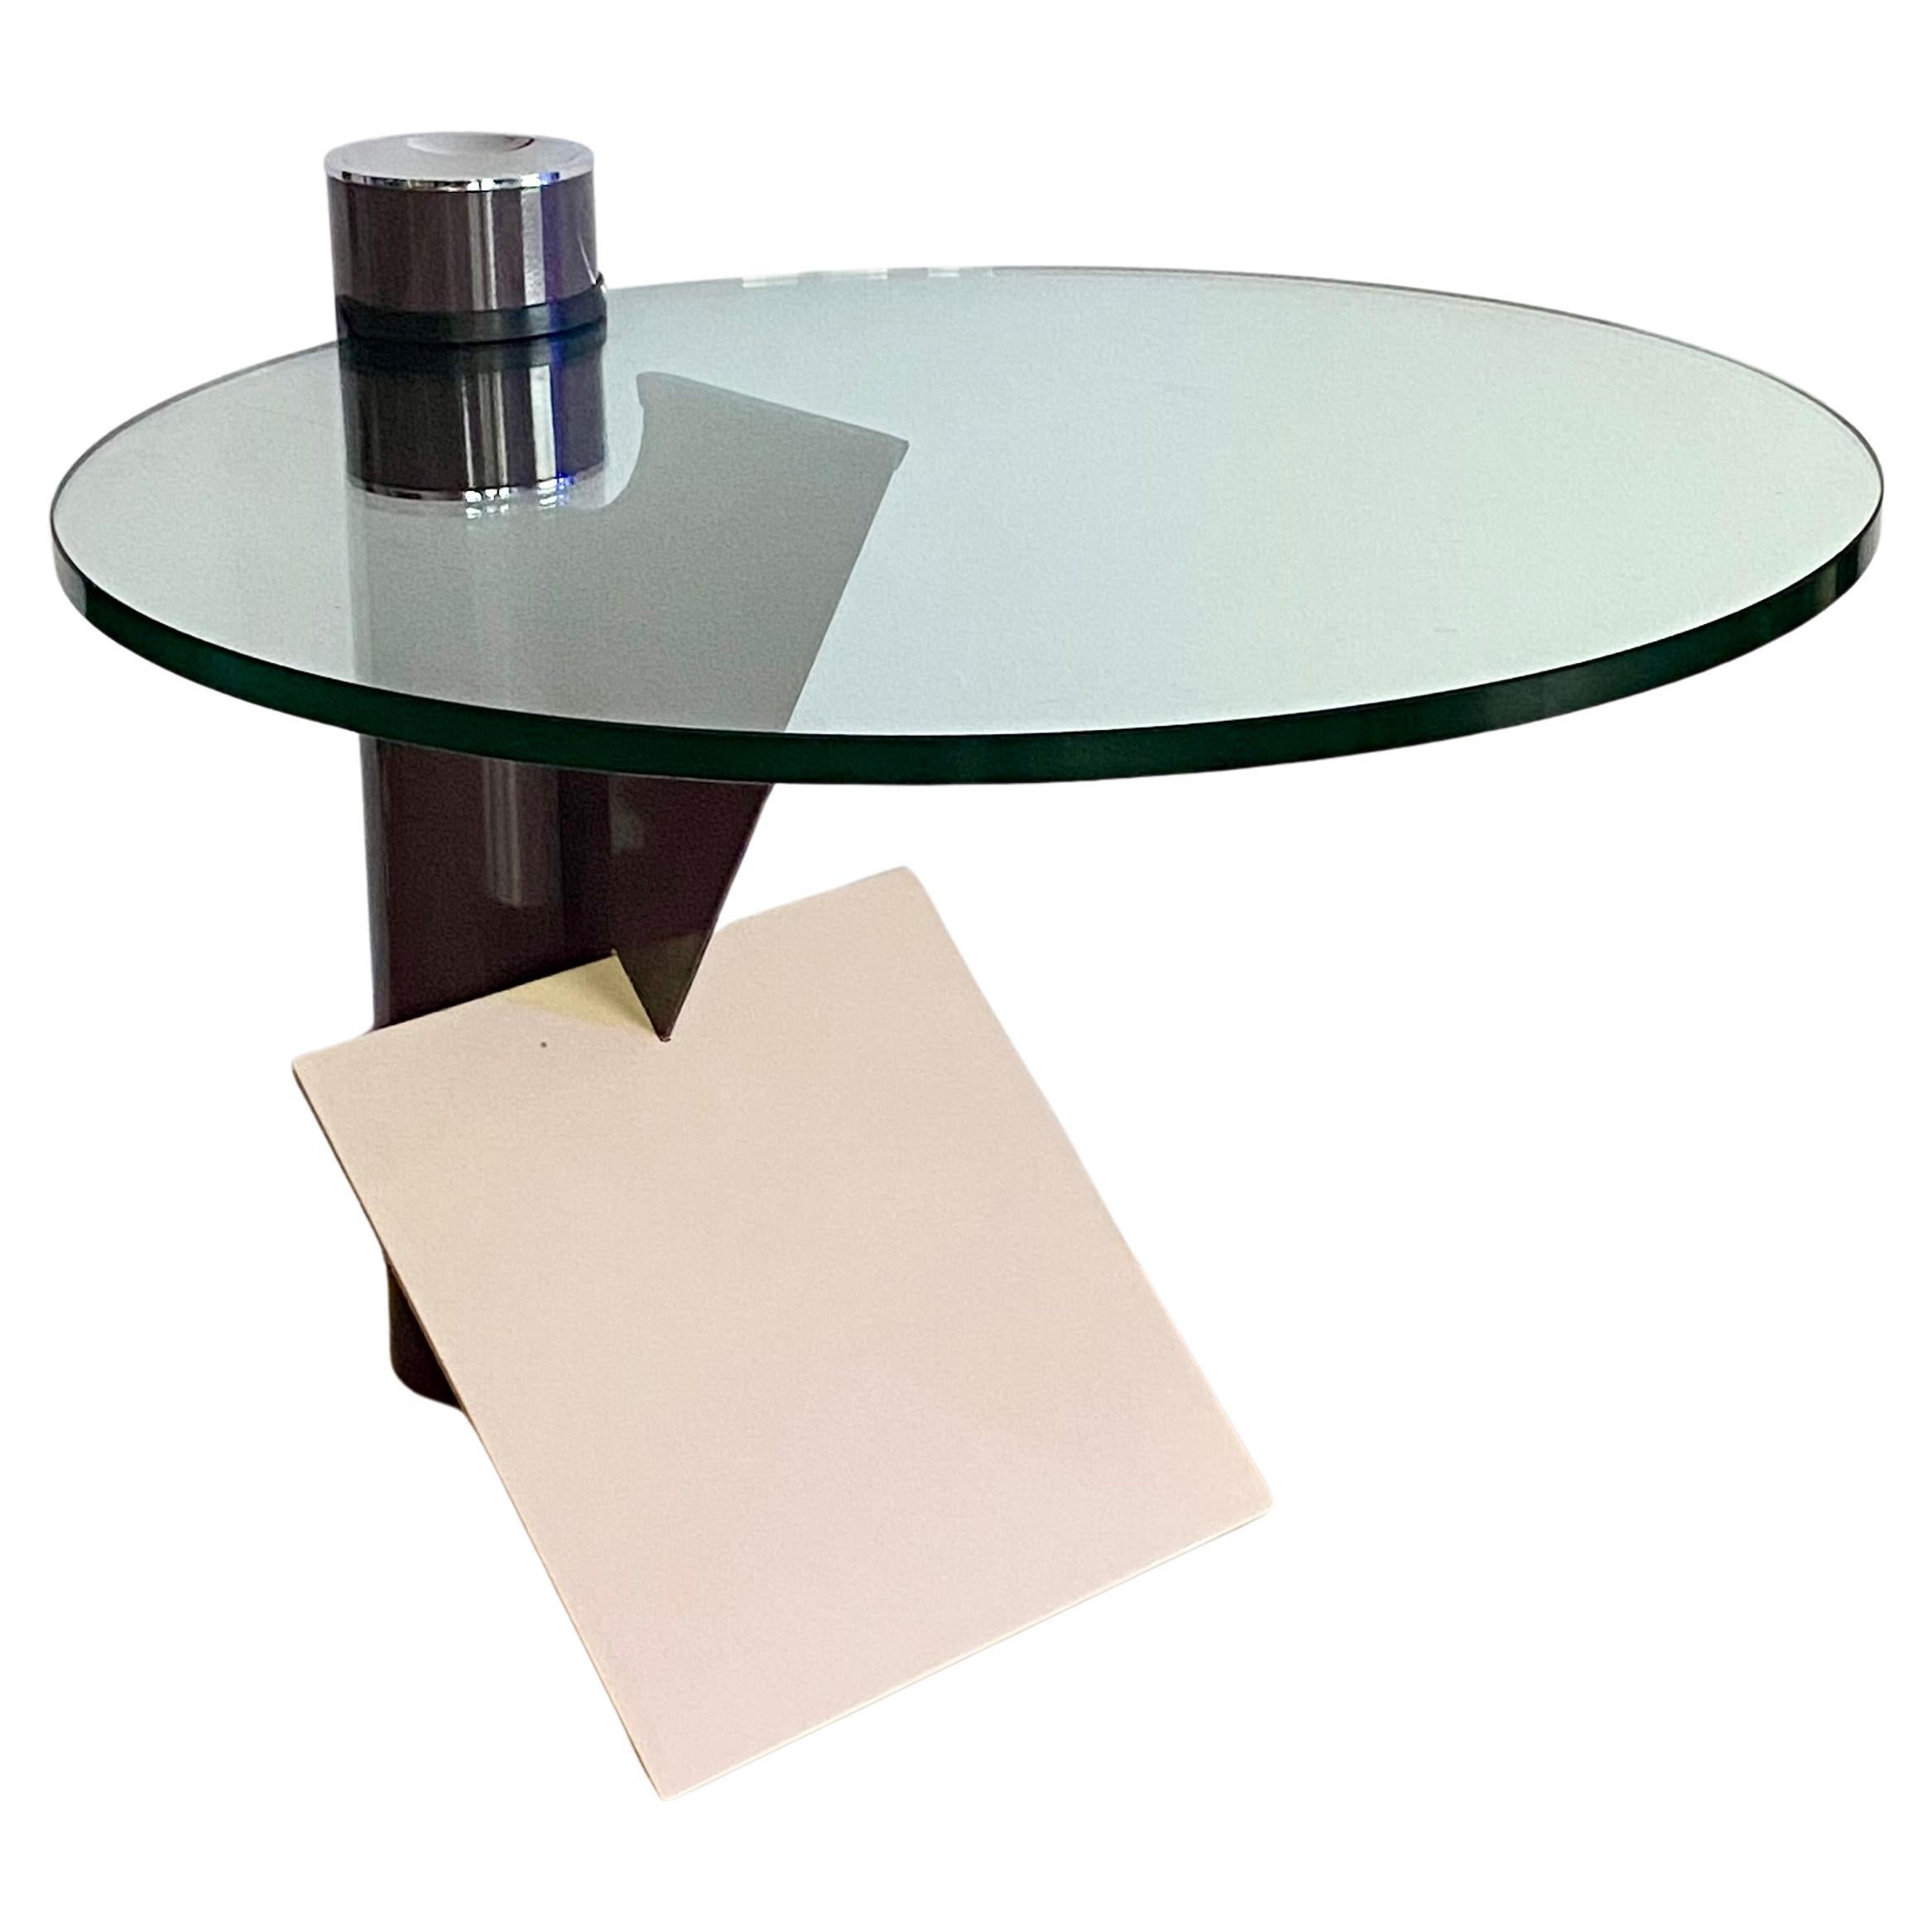 Steel and Glass Table by Peter Shire (b. 1947) for Saporiti, Italy For Sale